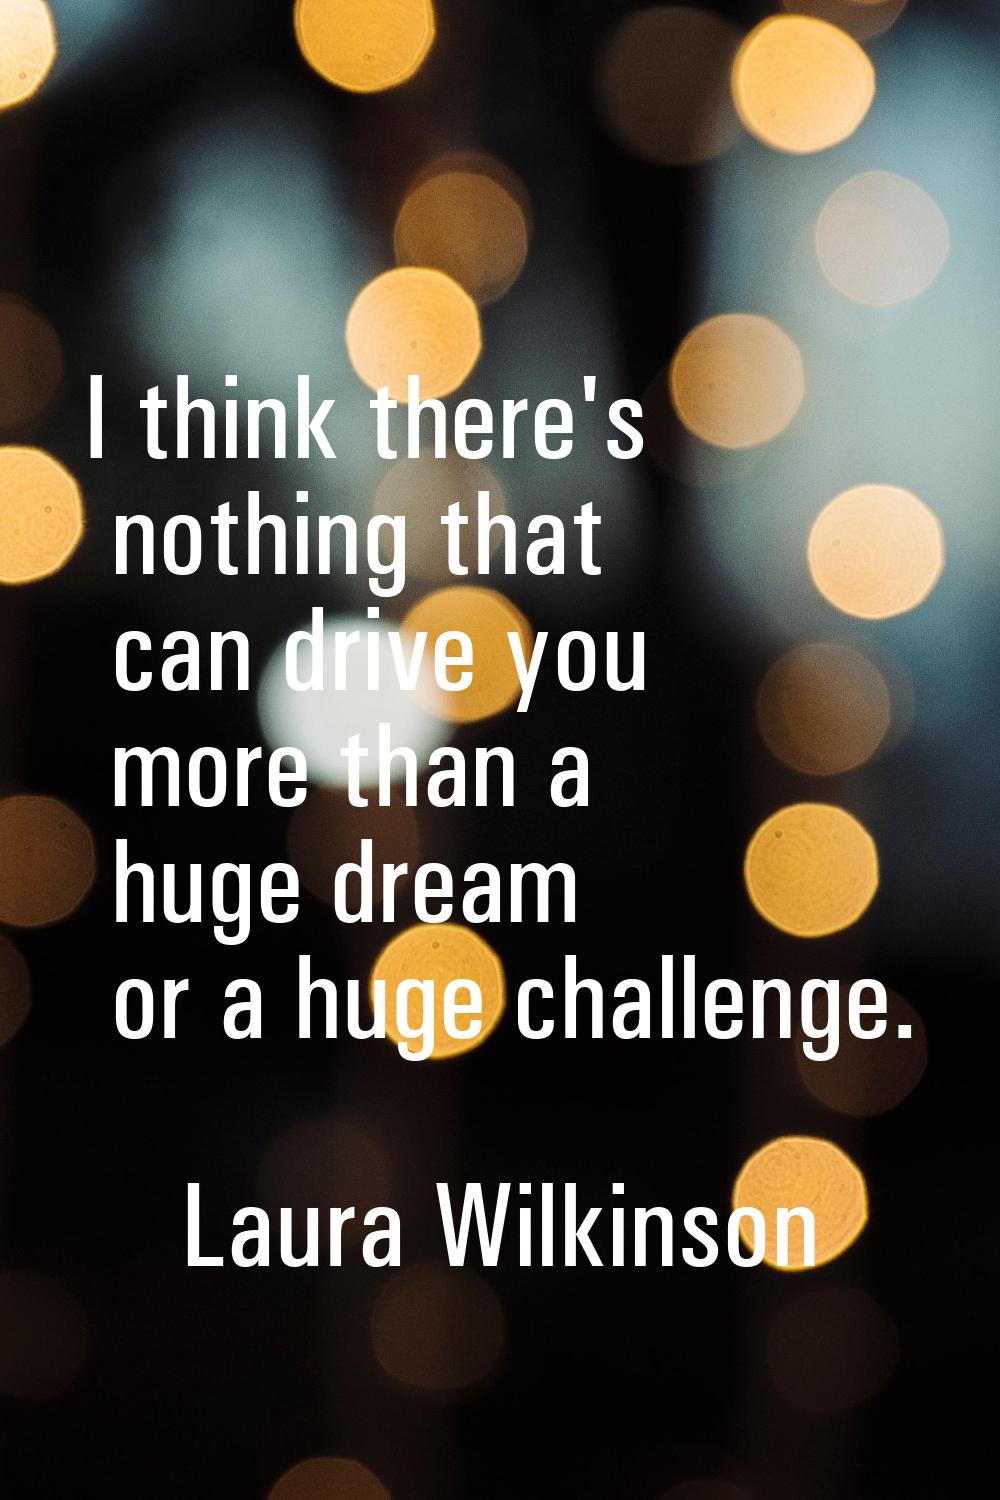 I think there's nothing that can drive you more than a huge dream or a huge challenge.